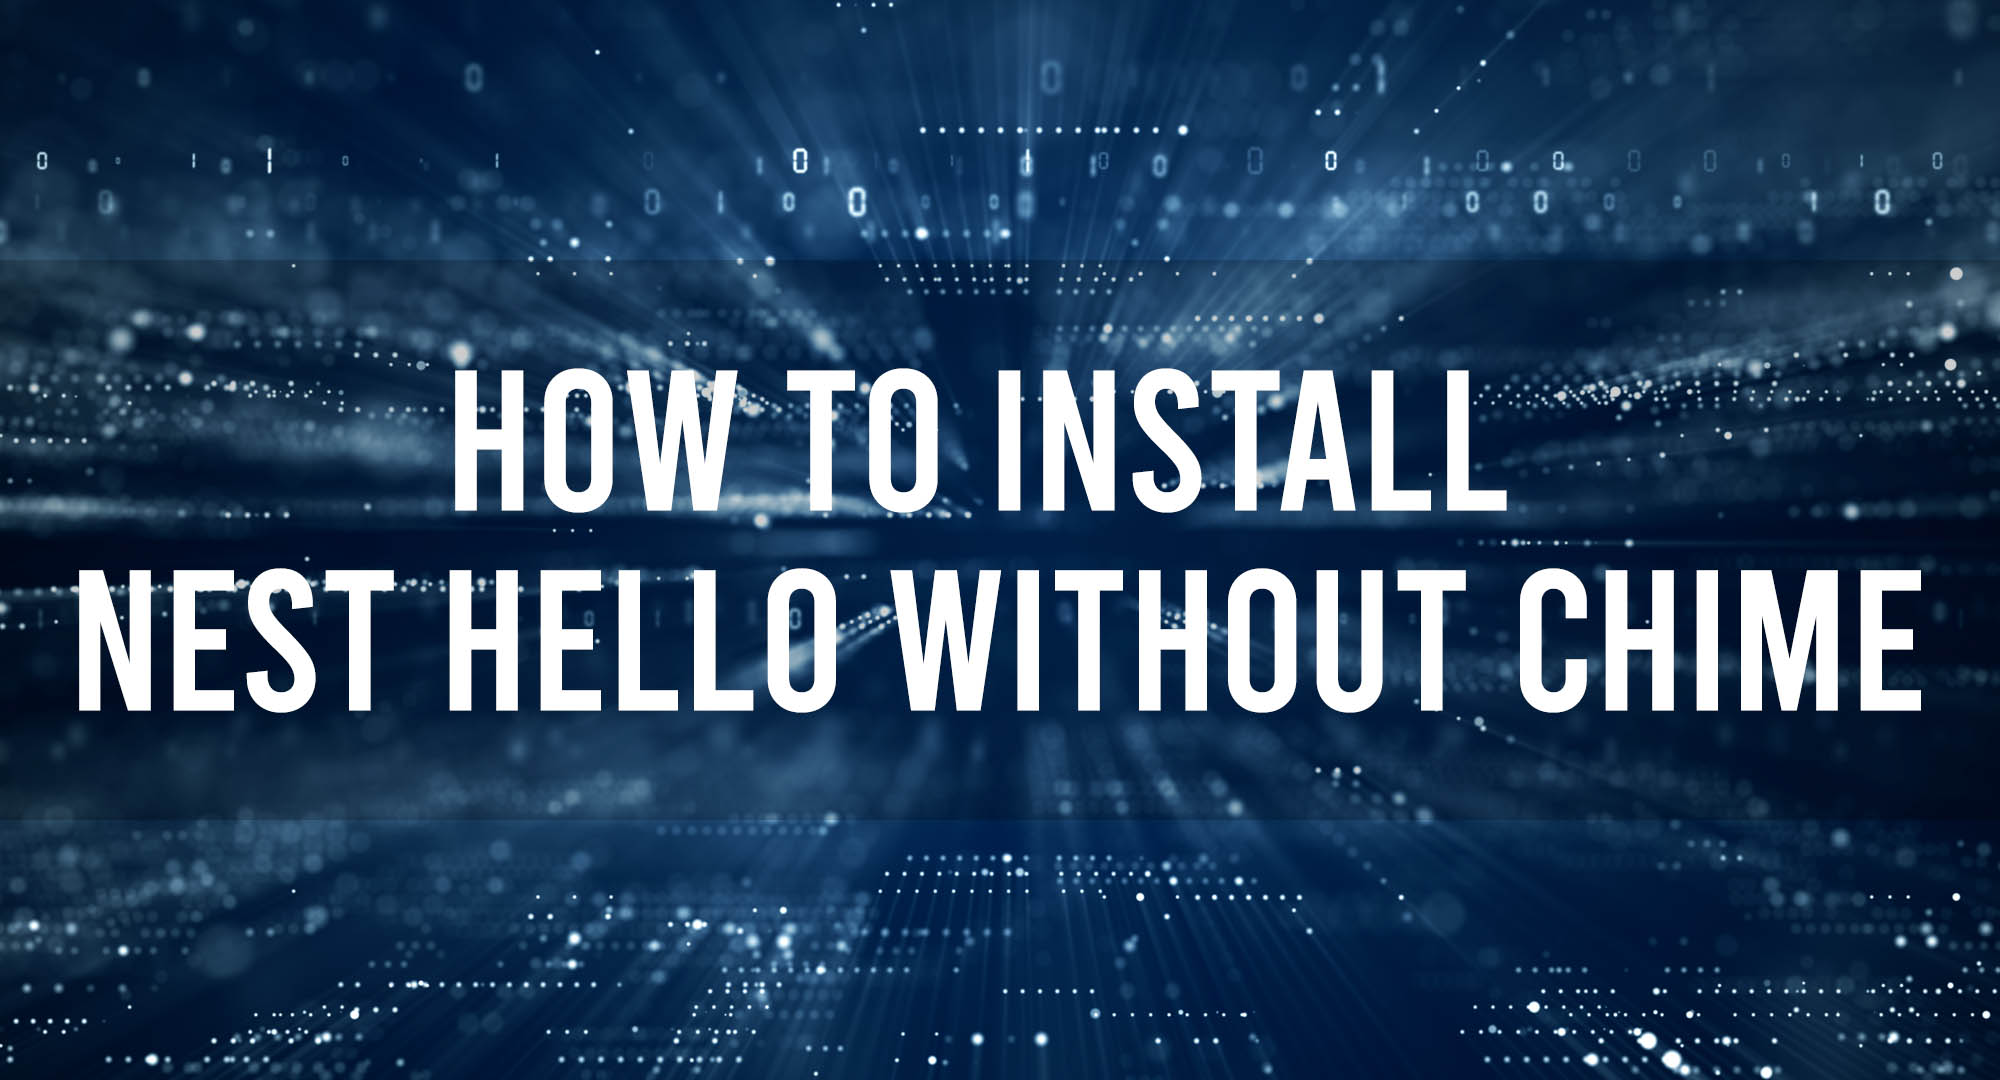 How to install Nest Hello Without Chime